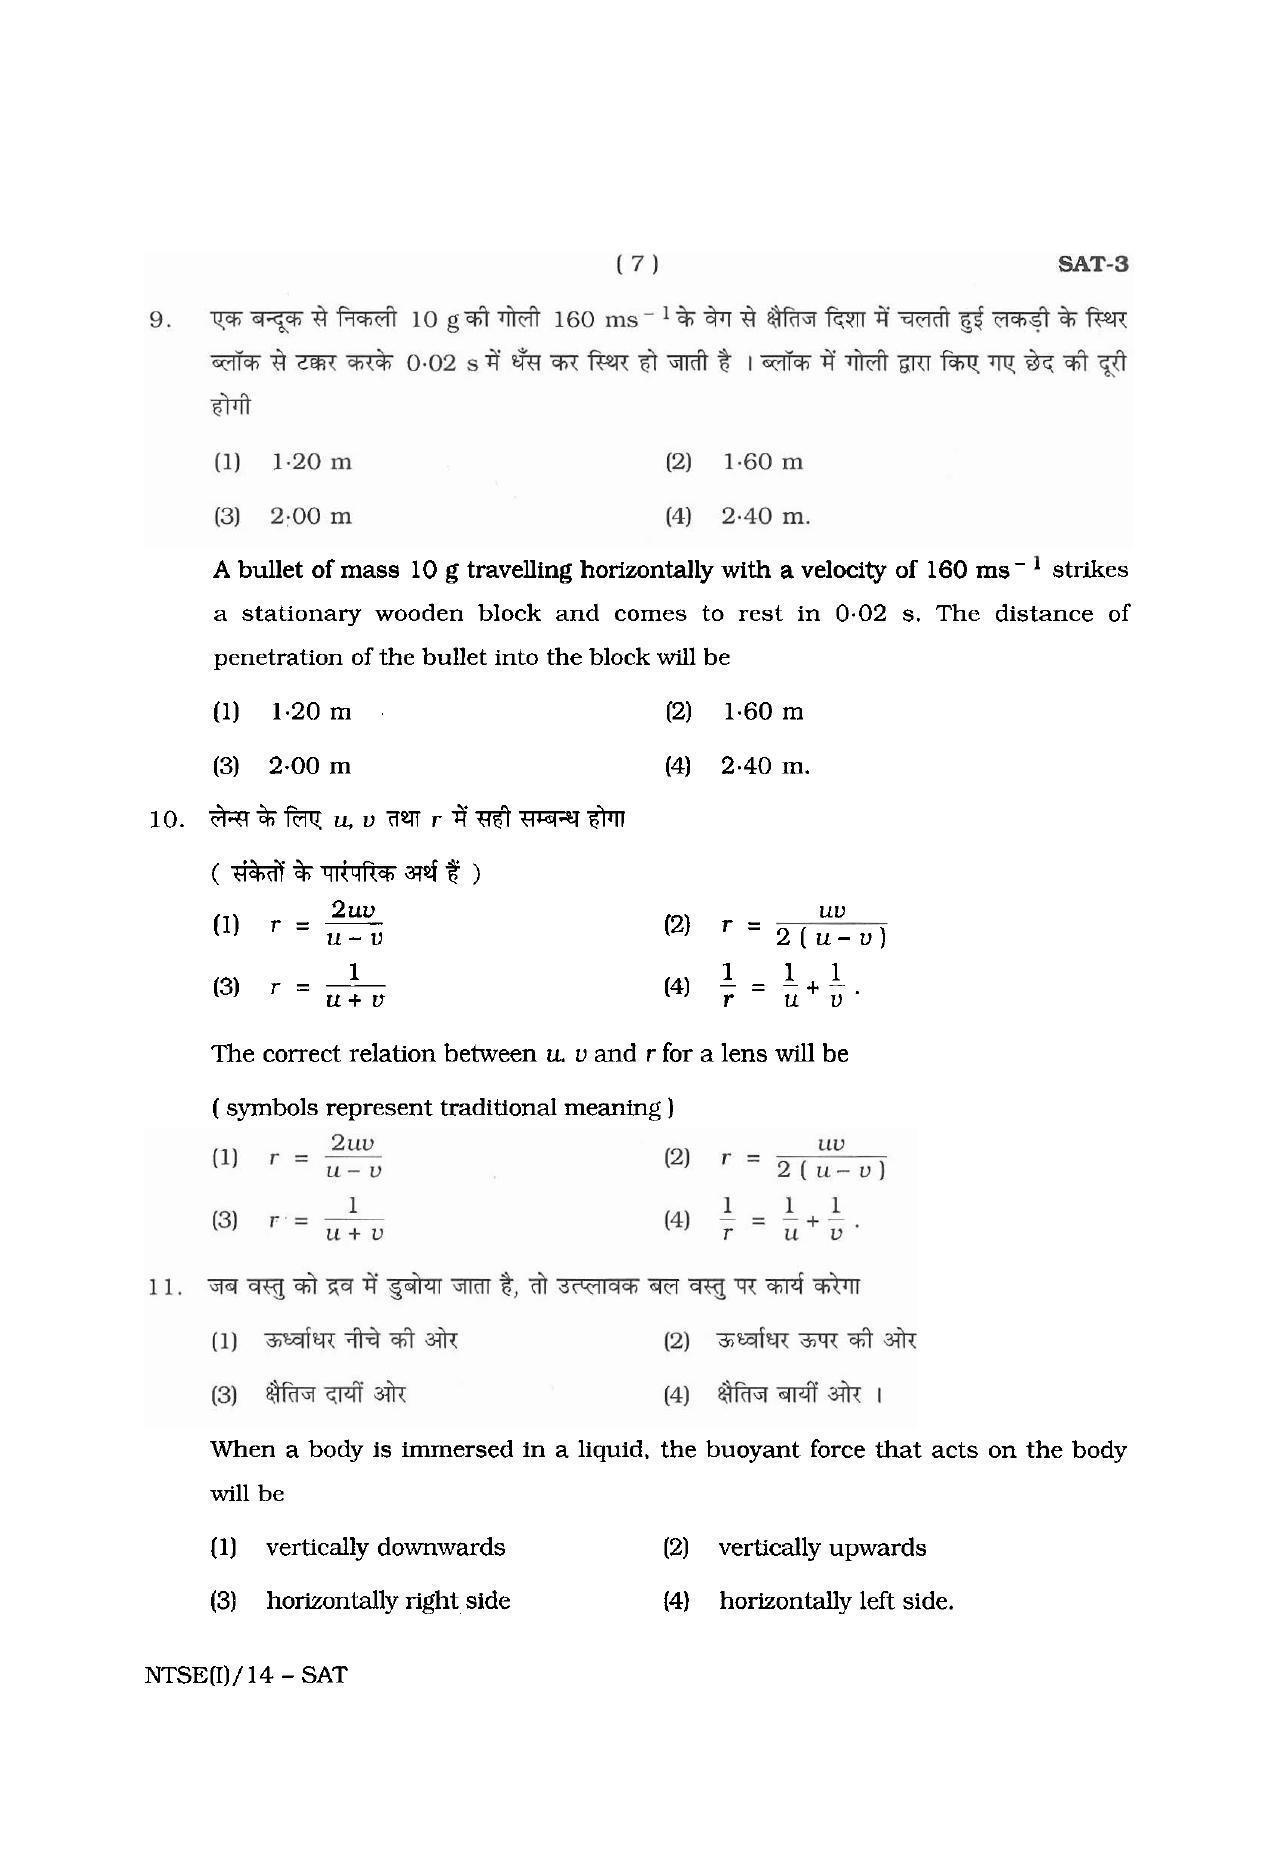 NTSE 2014 (Stage II) SAT Question Paper - Page 7